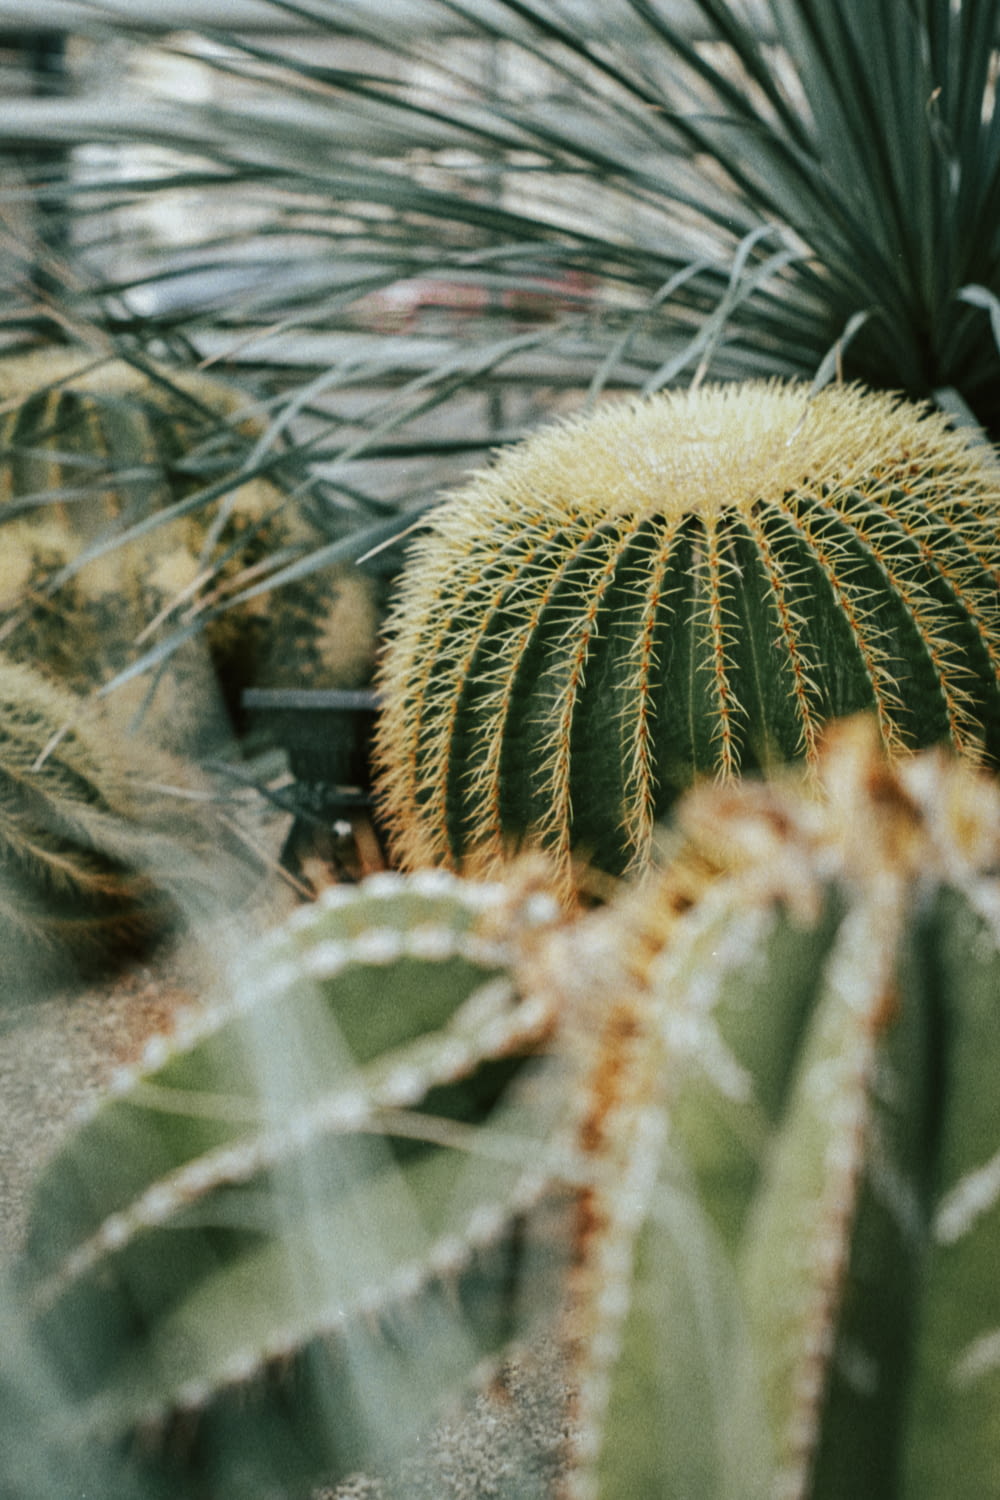 a close up of a cactus plant in a greenhouse